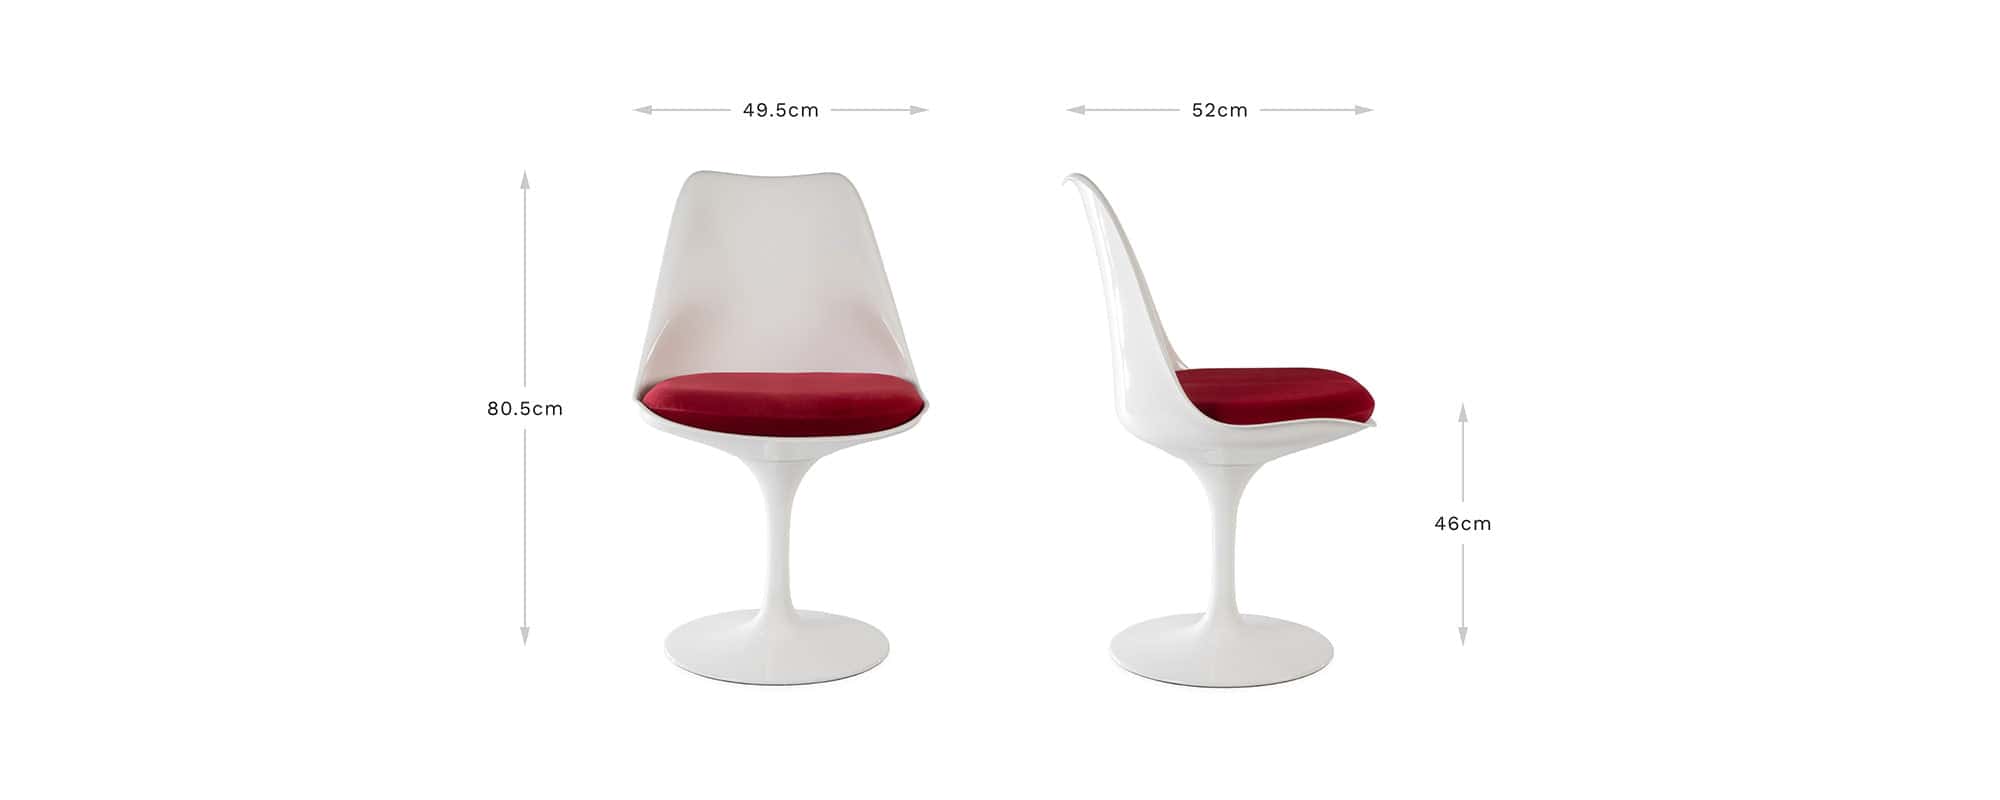 A classic Saarinen Tulip Side Chair can be seen front and side on with arrows to denote dimensions which are also given in centimetres